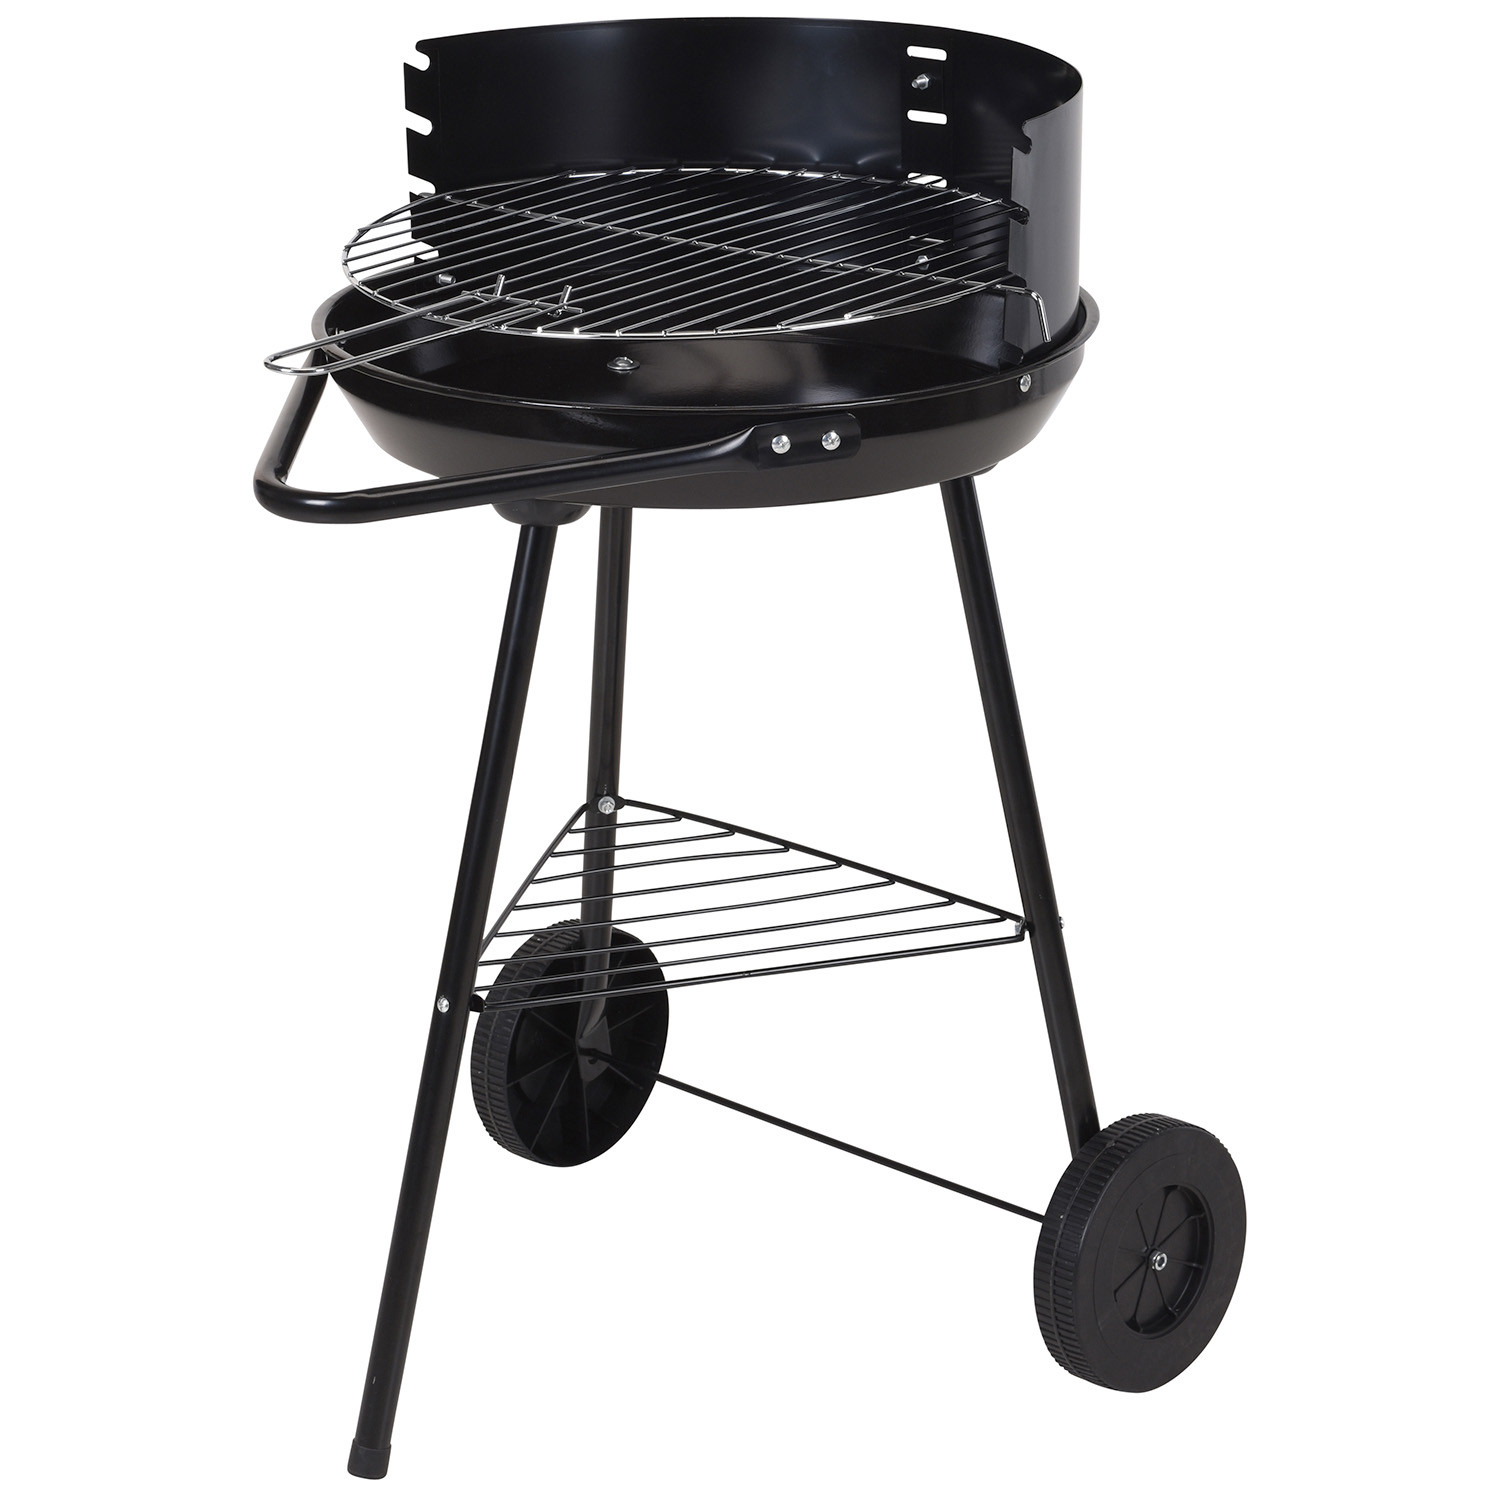 Charcoal BBQ Grill on Legs Image